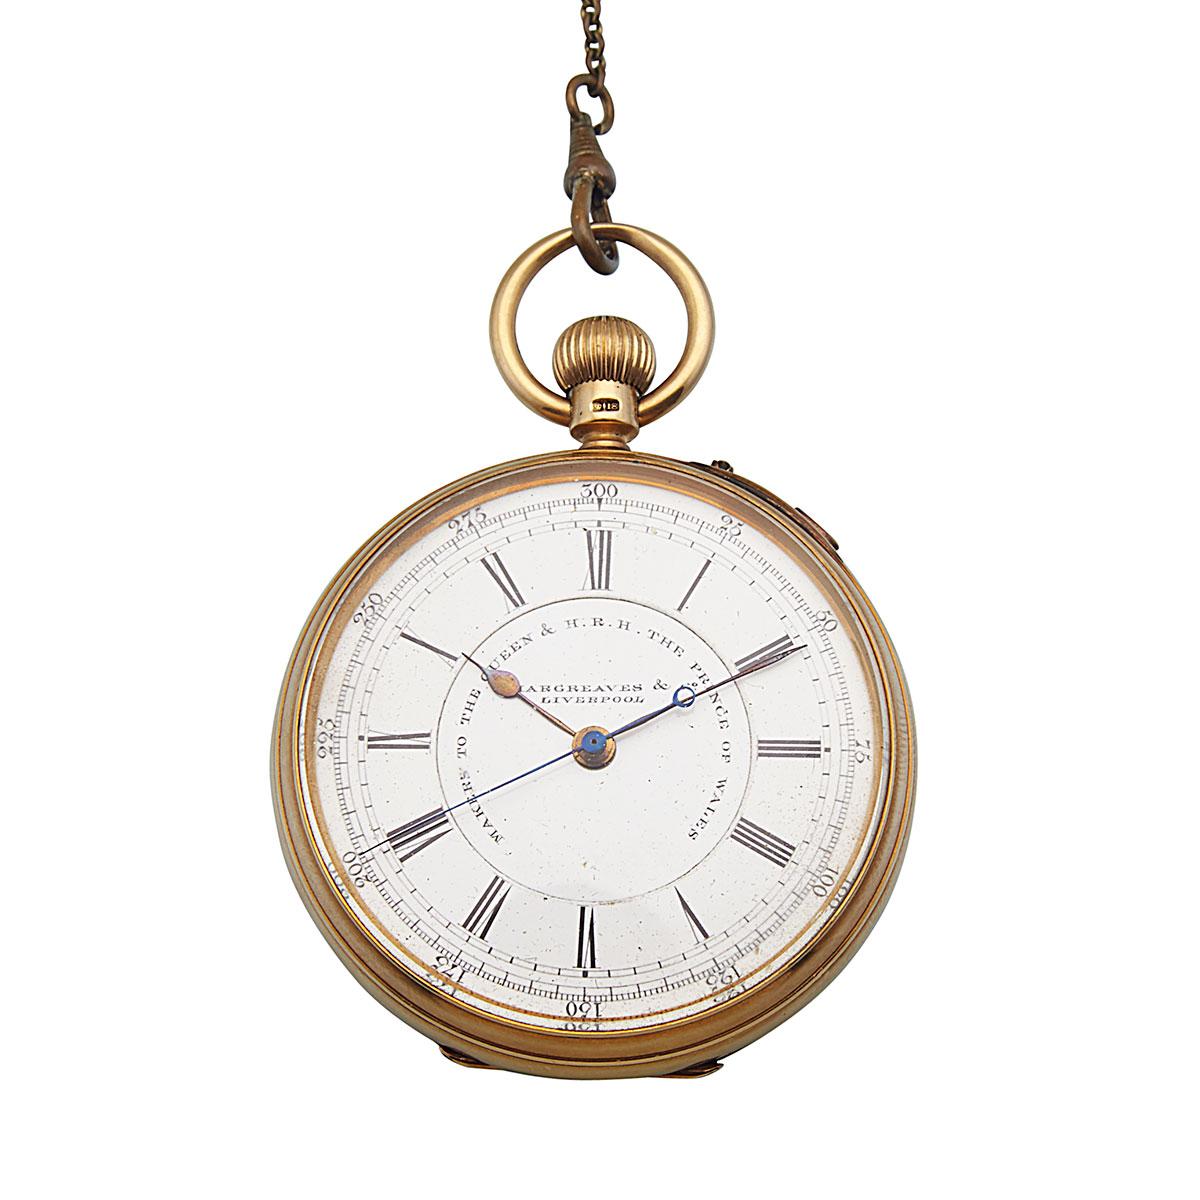 J. Hargreaves & Co. Of Liverpool Openface, Stemwind, Stop/Start Chronometre Pocket Watch